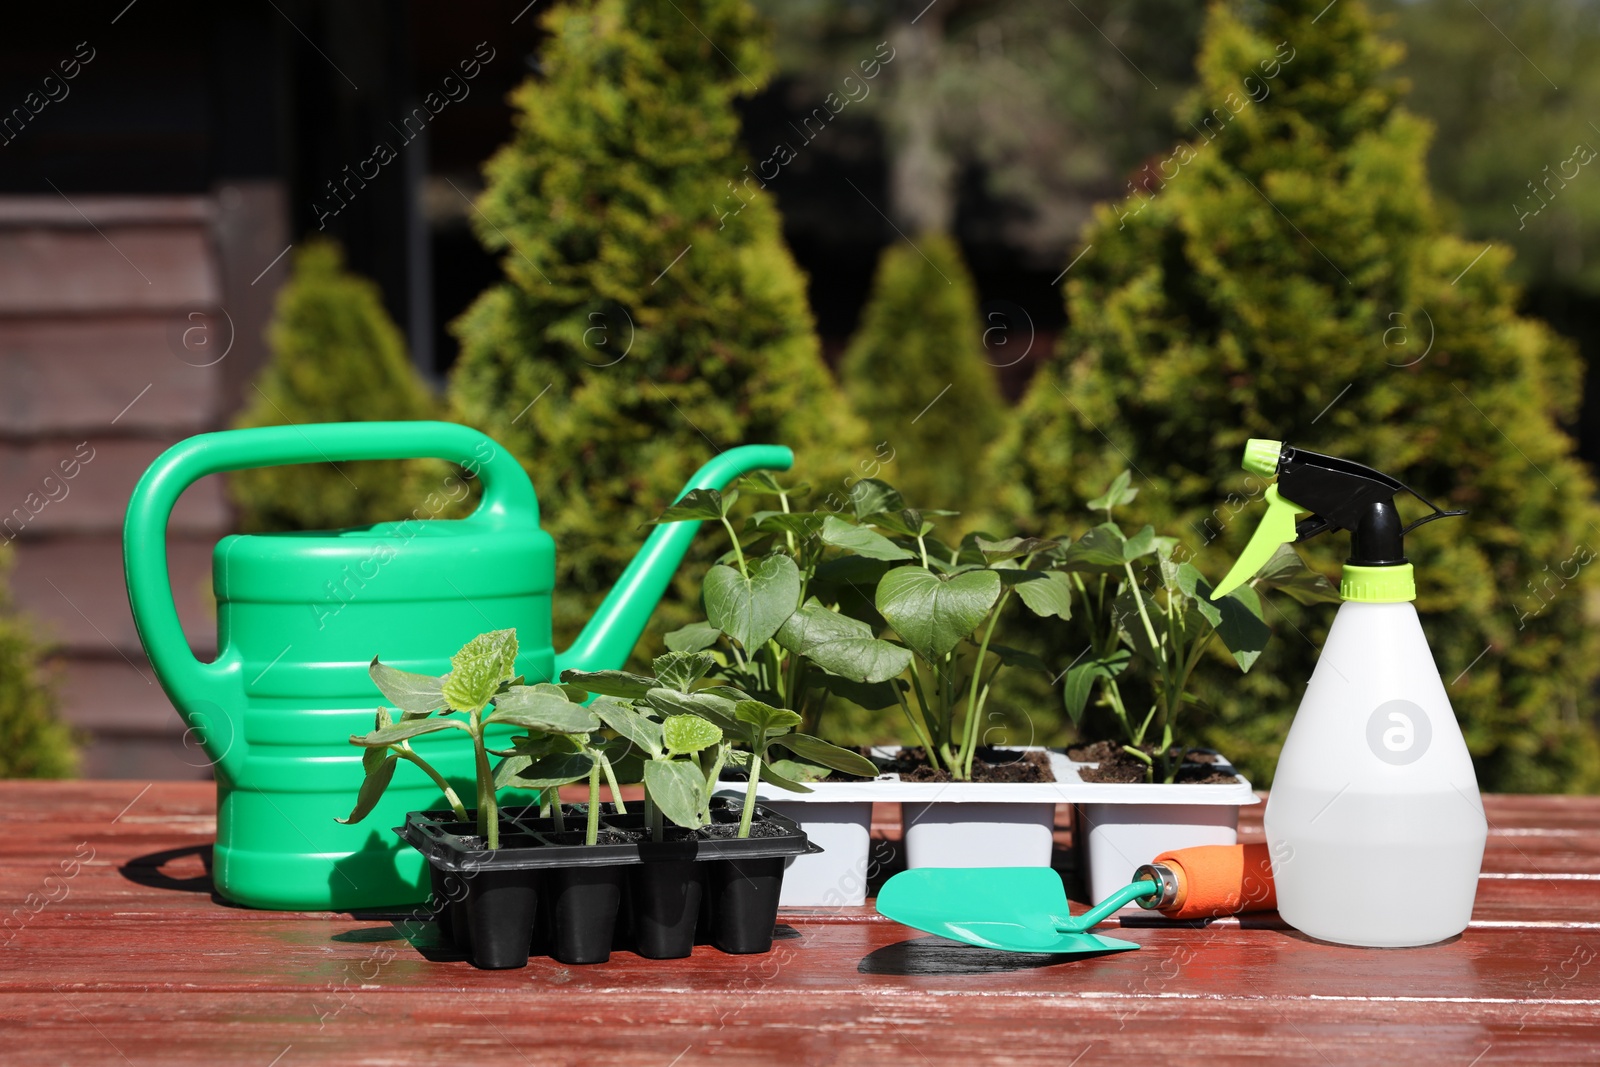 Photo of Seedlings growing in plastic containers, watering can, spray bottle and trowel on wooden table outdoors